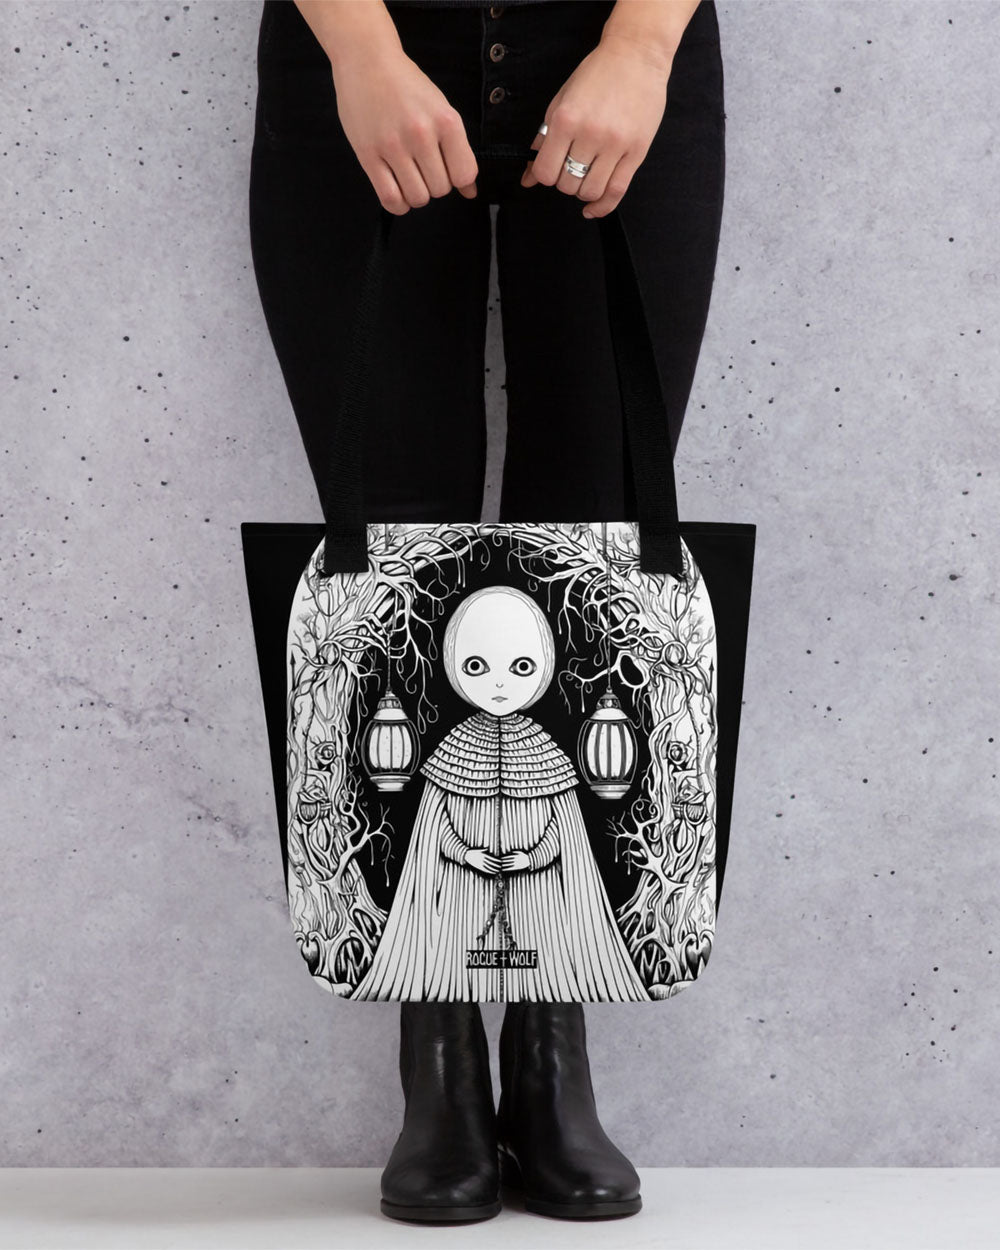 Feeling Lost Vegan Tote Bag - Goth Accessories Witchy Alt Style Large Foldable Tote for All